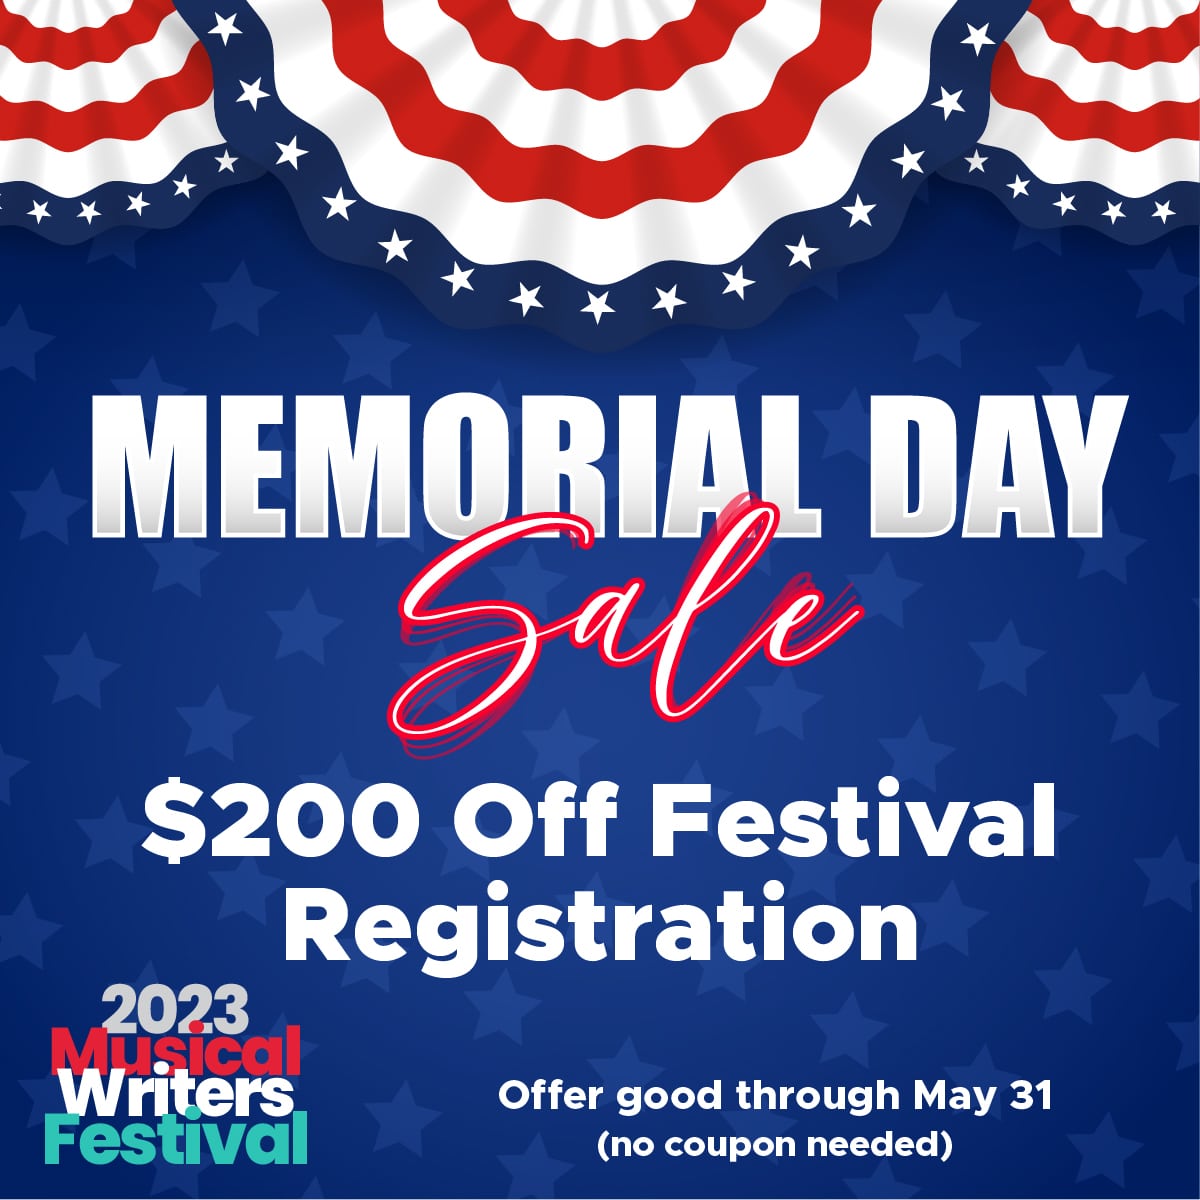 2023 Musical Writers Festival Memorial Day Sale